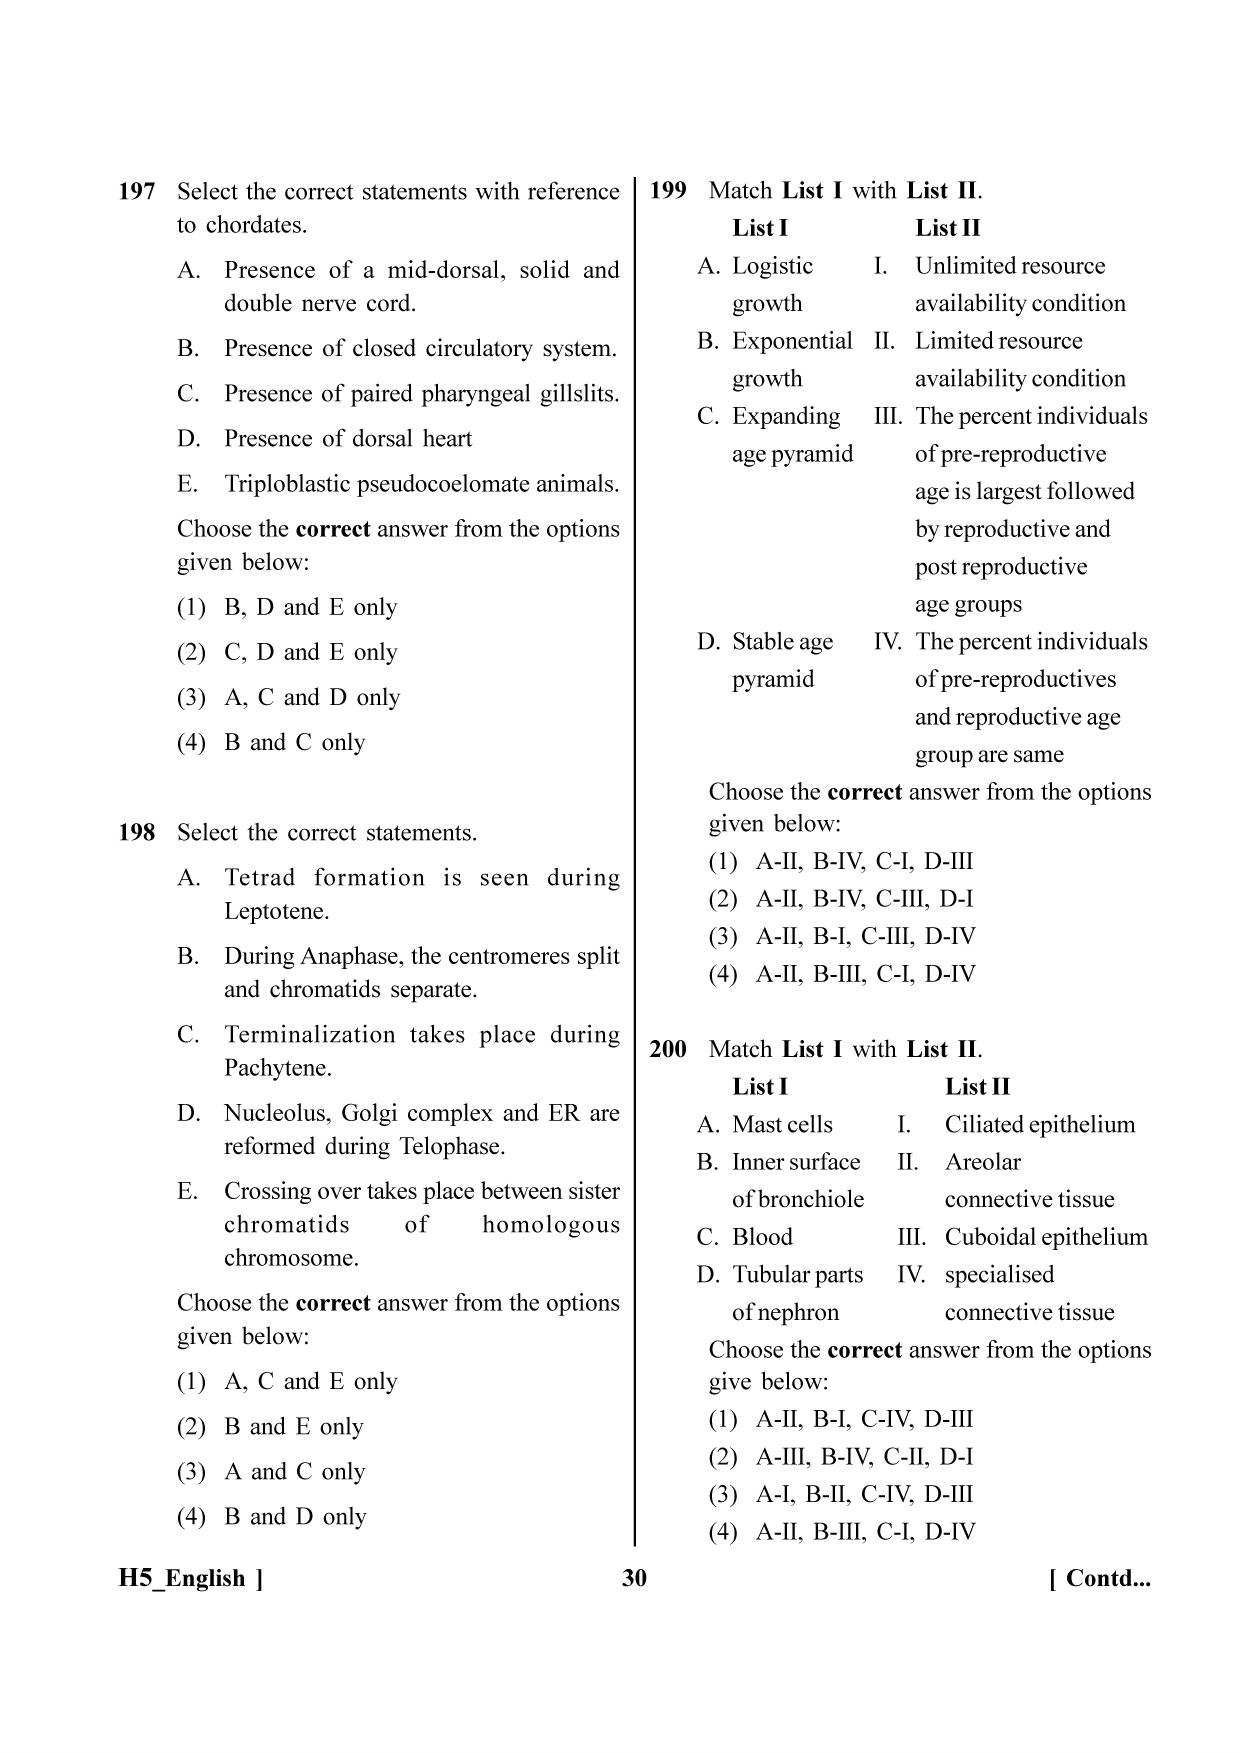 NEET 2023 H5 Question Paper - Page 30